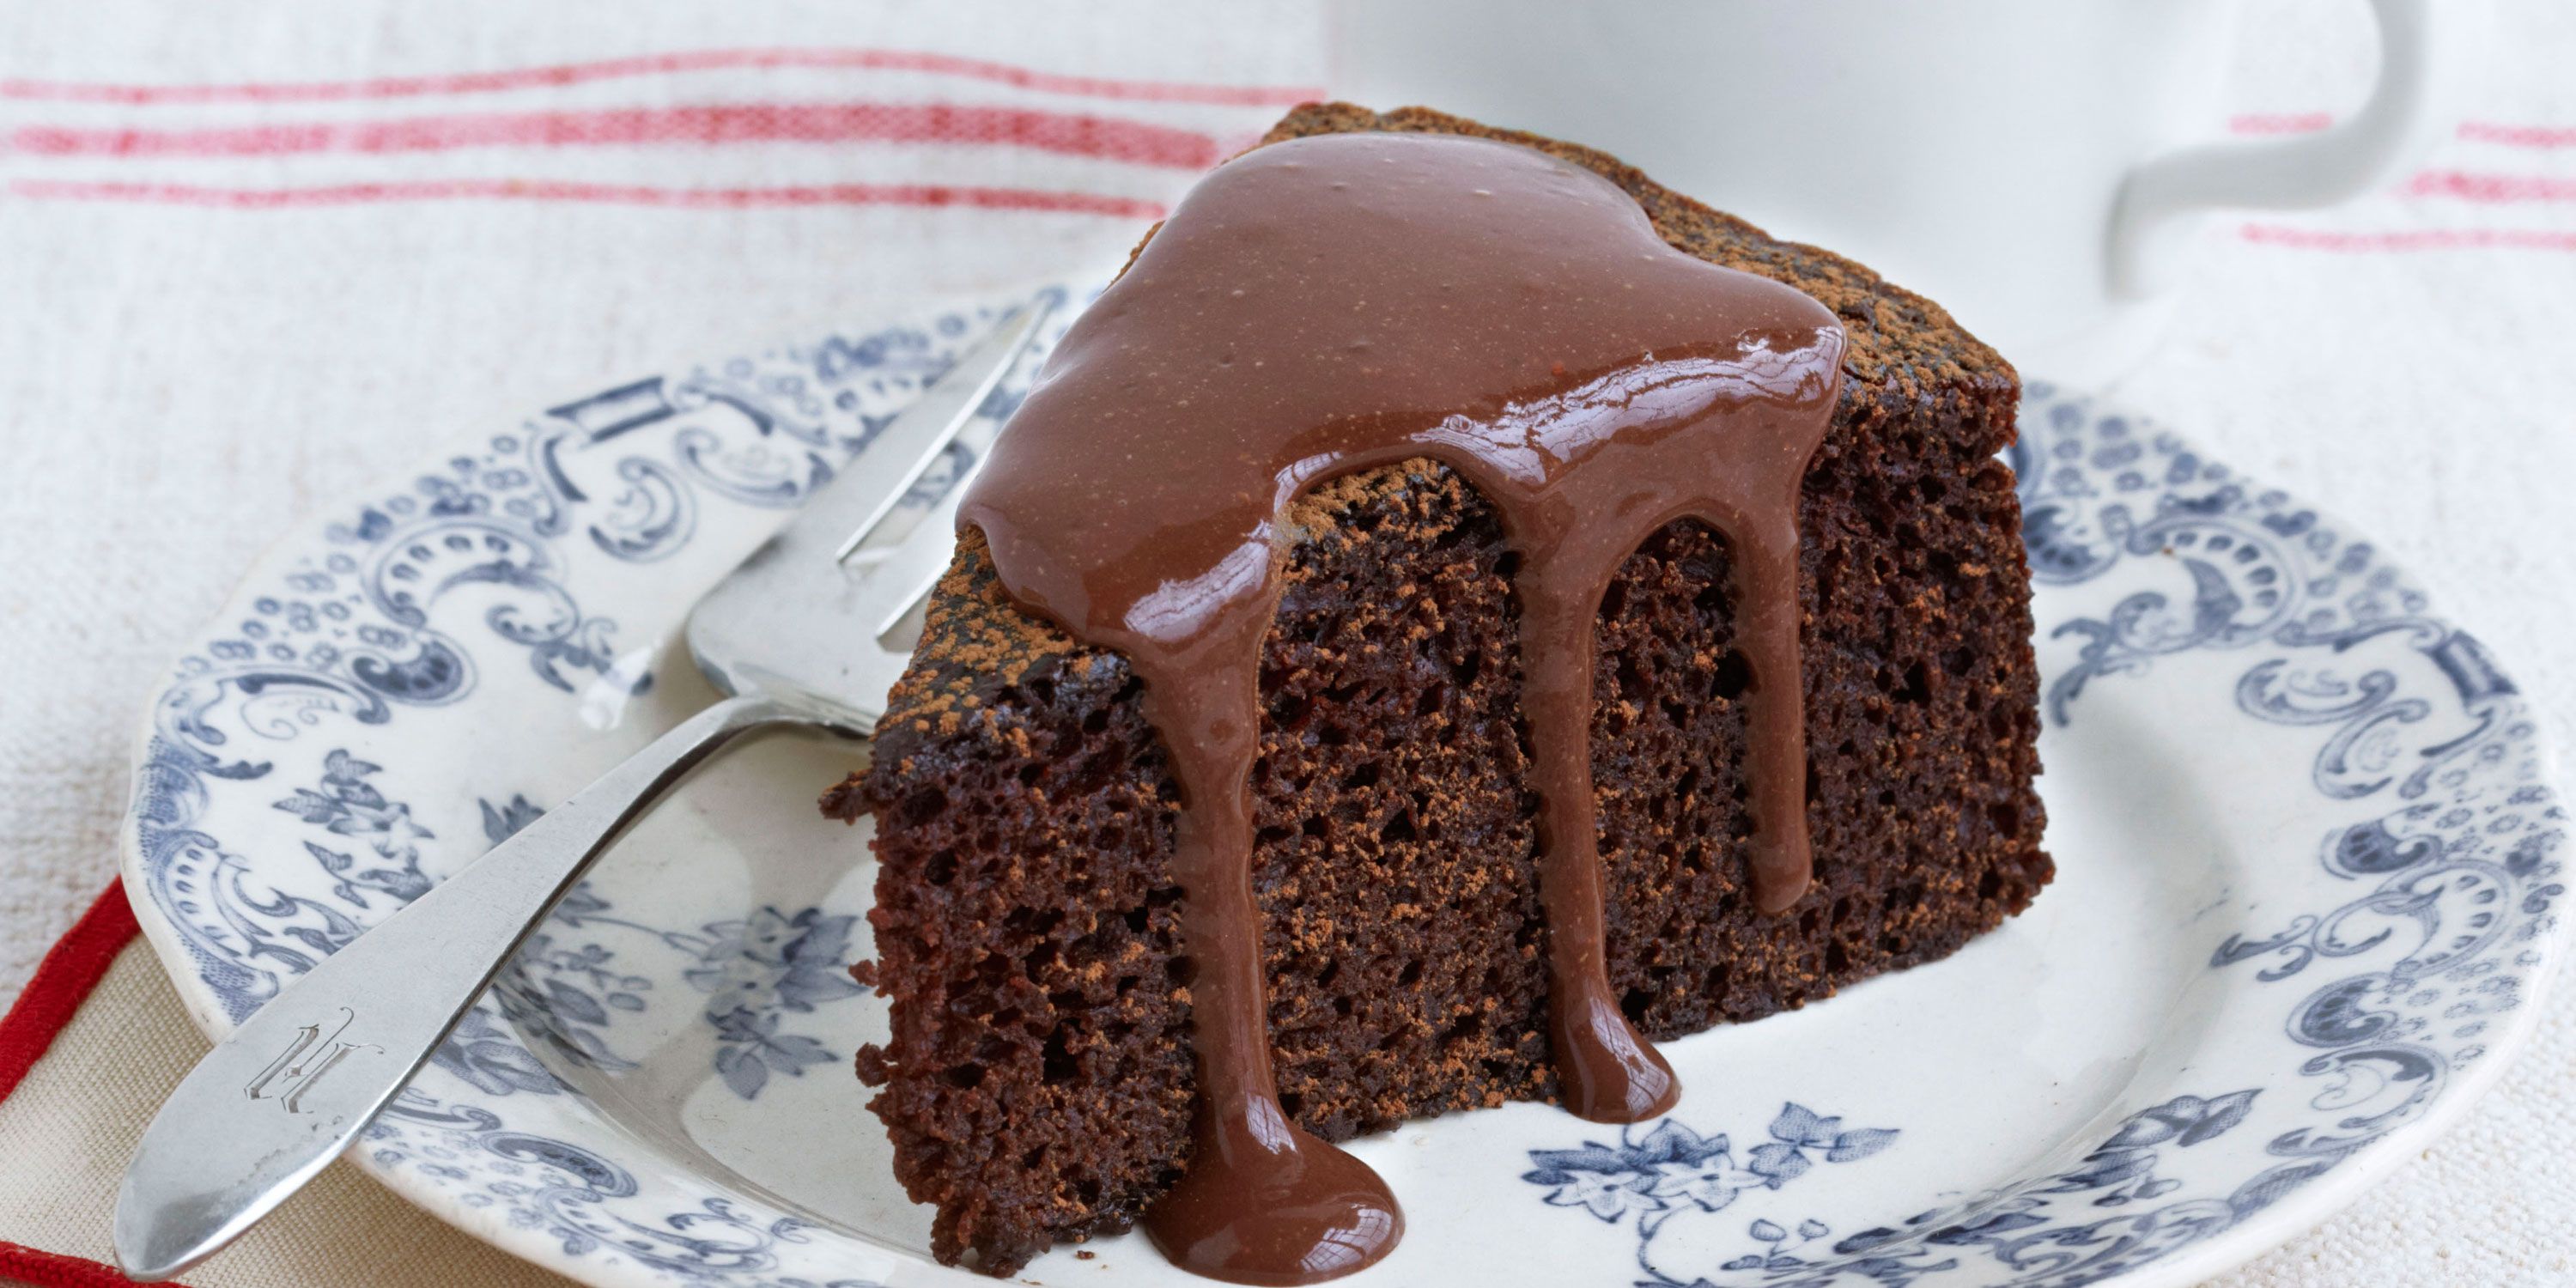 The Ingredient That Will Change Your Chocolate Cake Forever